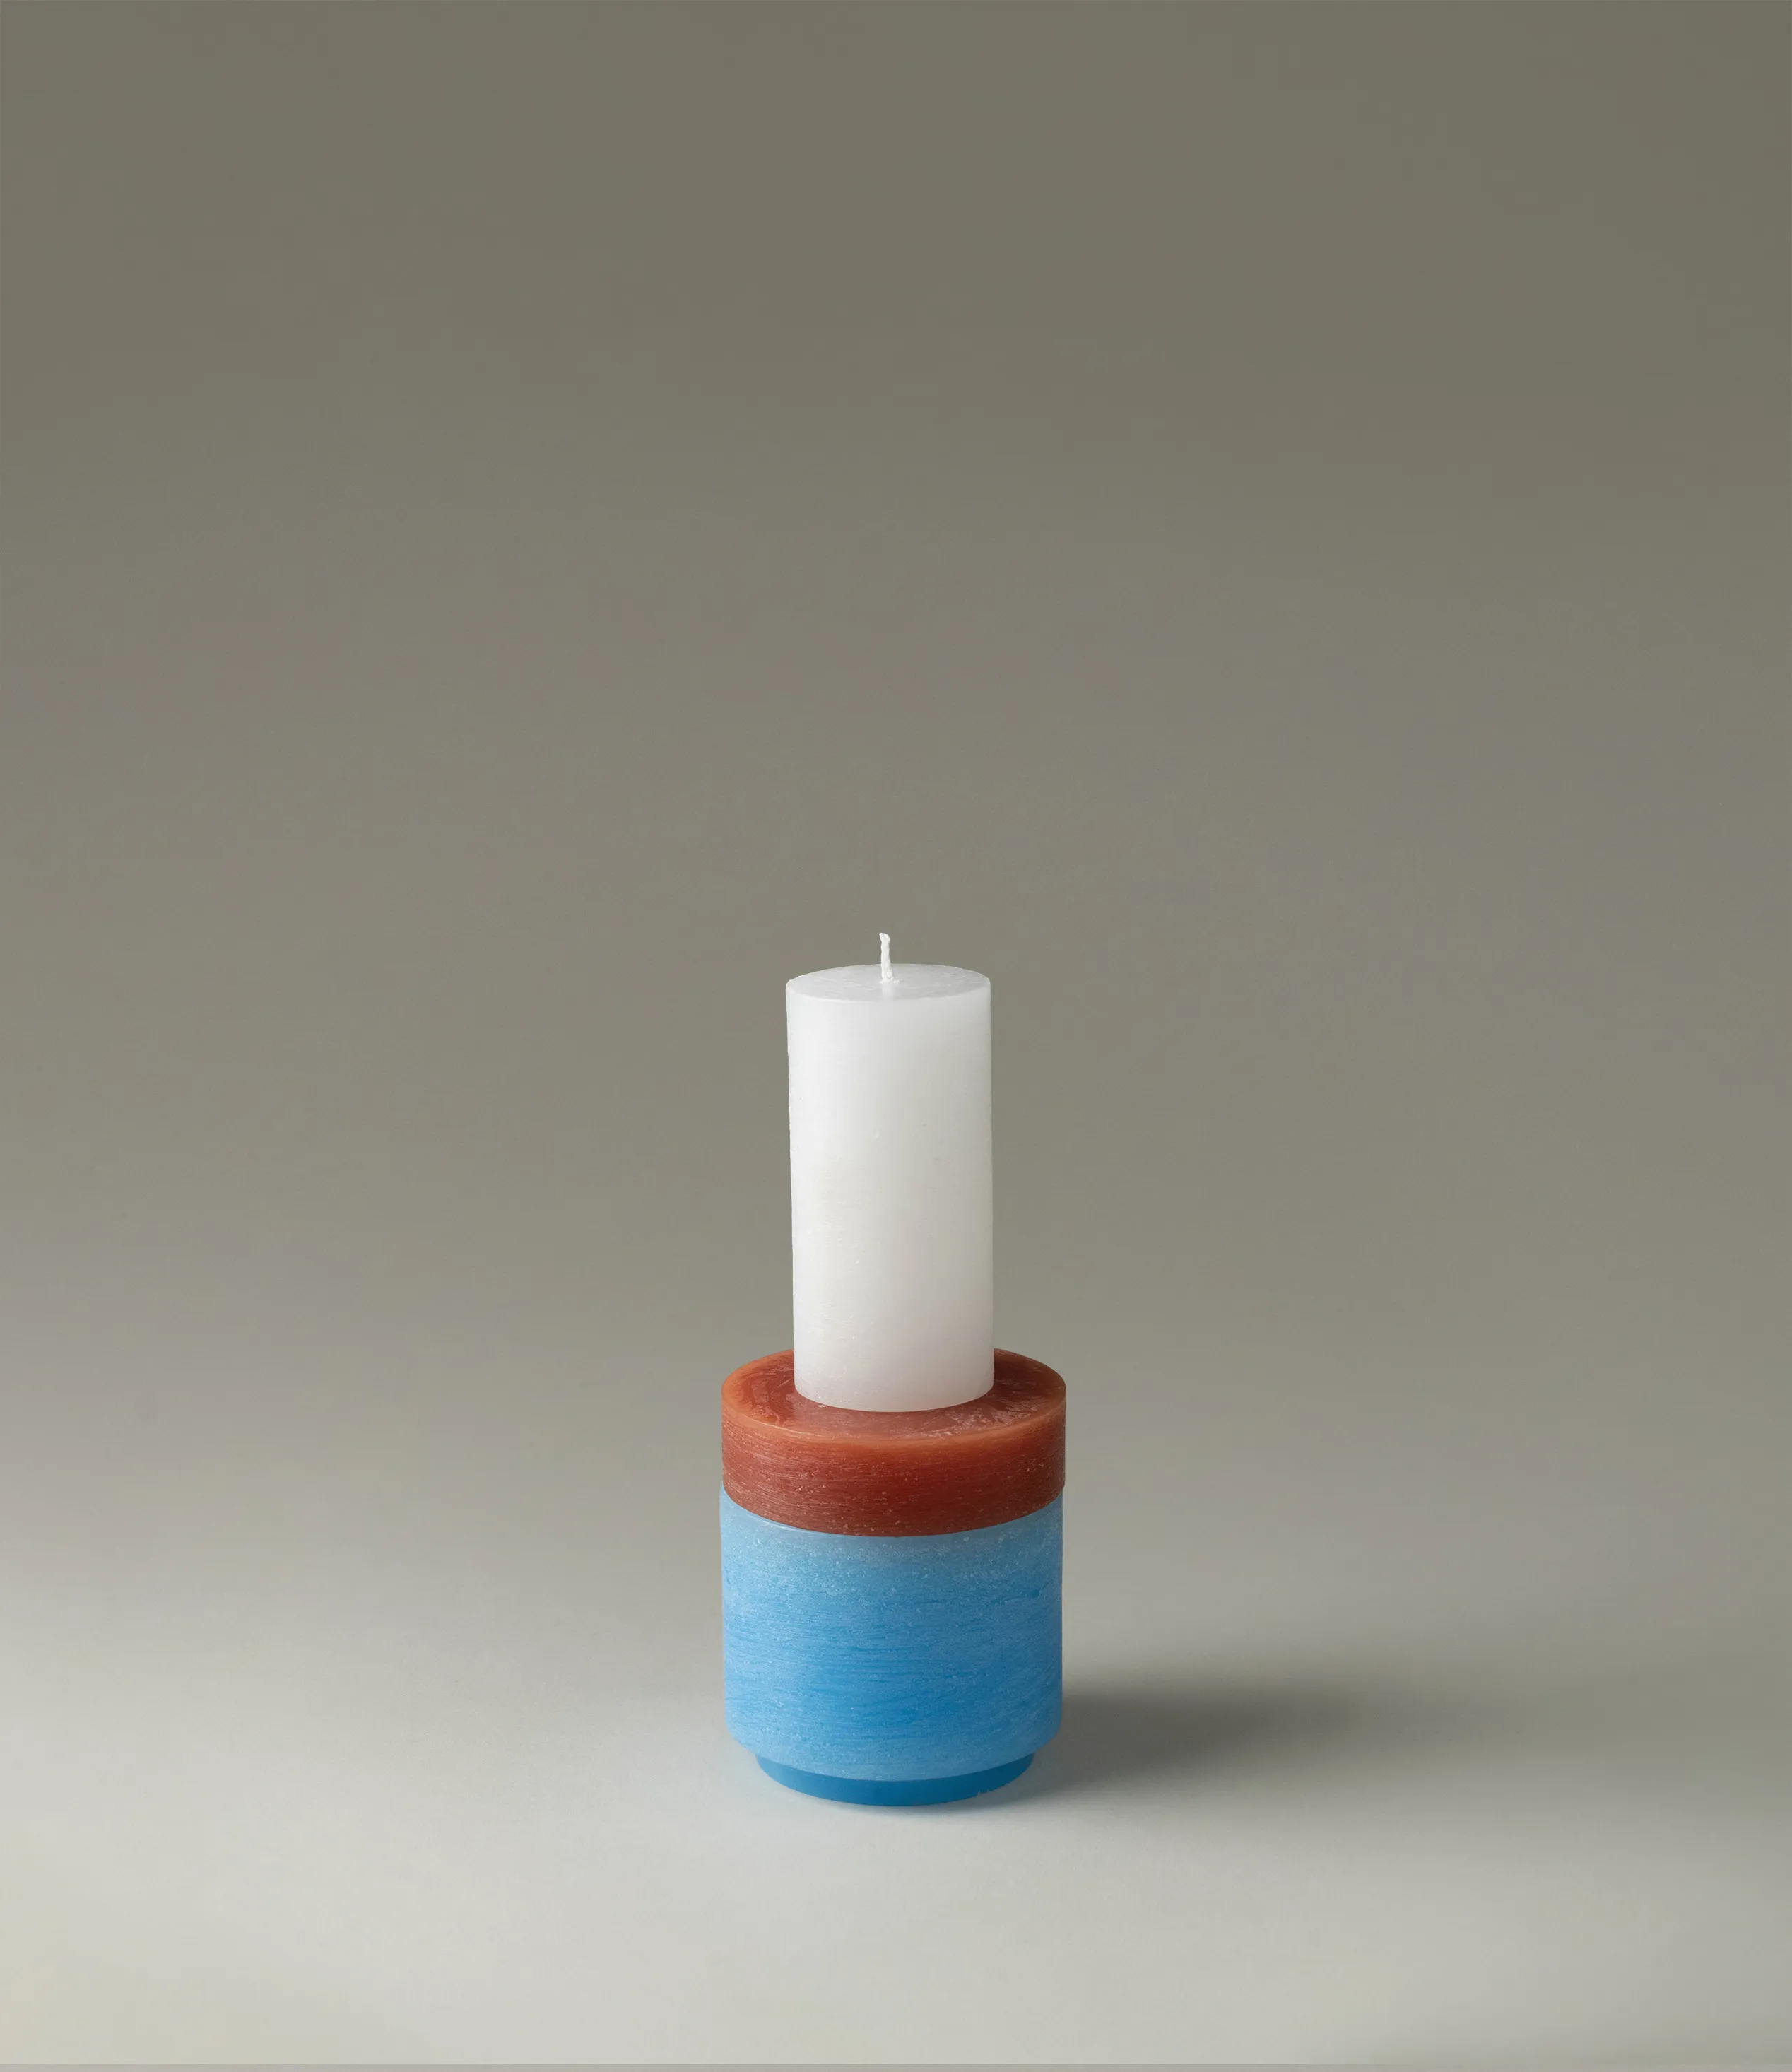 Candl Stack from Stan Editons is a playful item, you can rearrange the parts of the item as you wish. The parts are colored white, brown and turquoise.